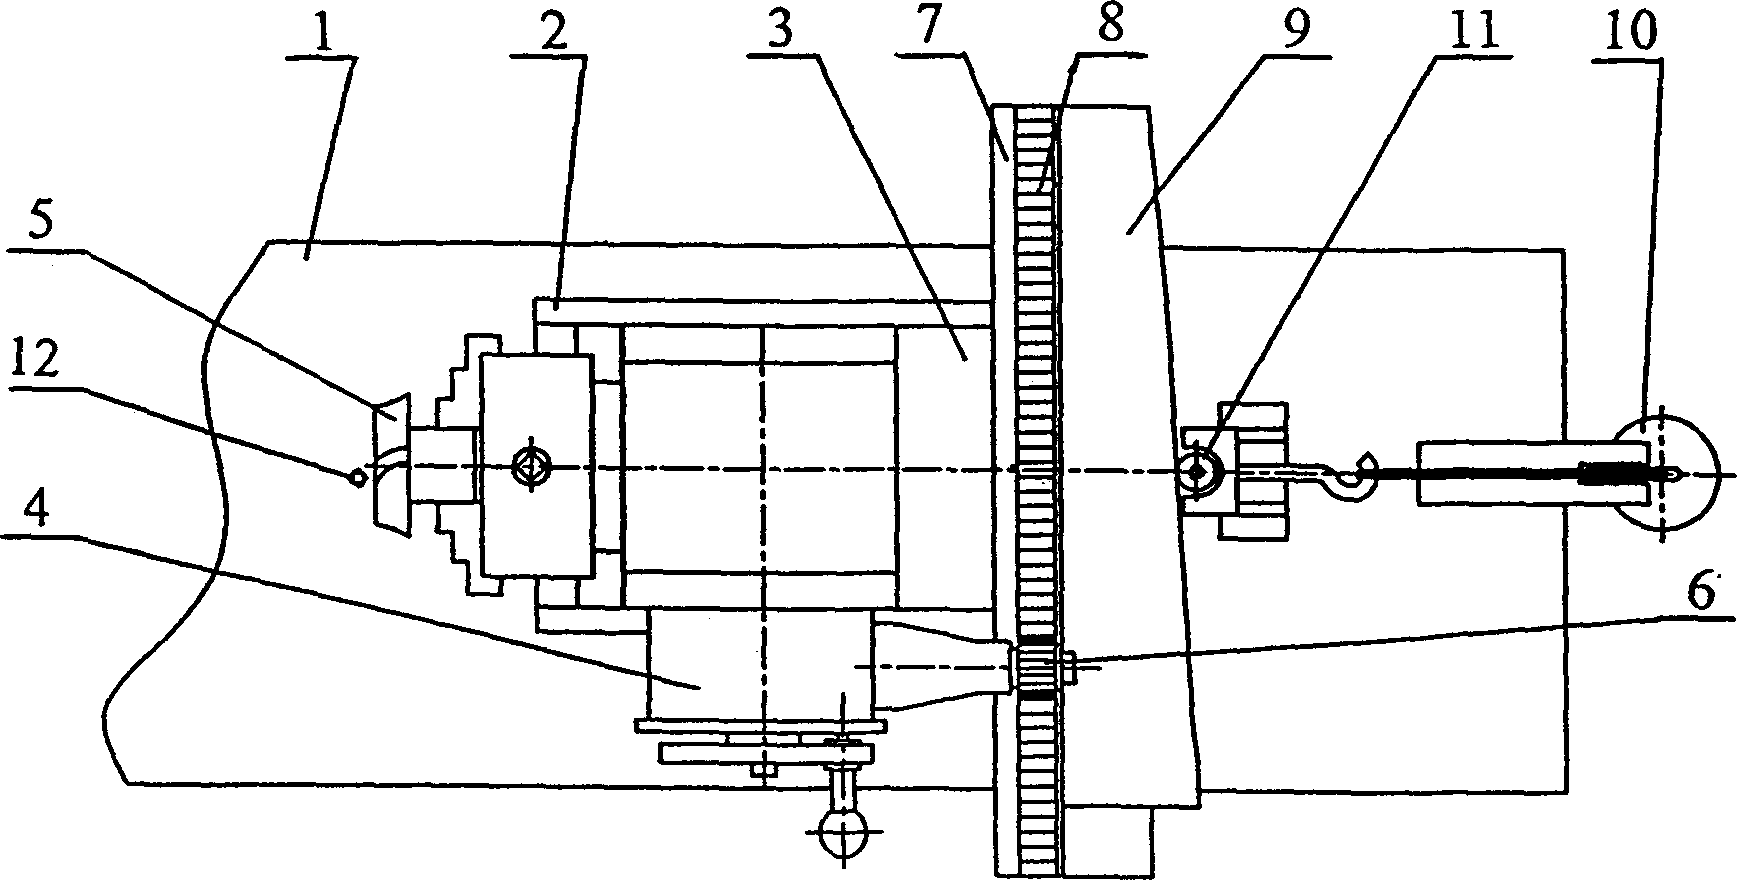 Mechanism for milling impeller inducer of centrifugal compressor with ordinary milling machine